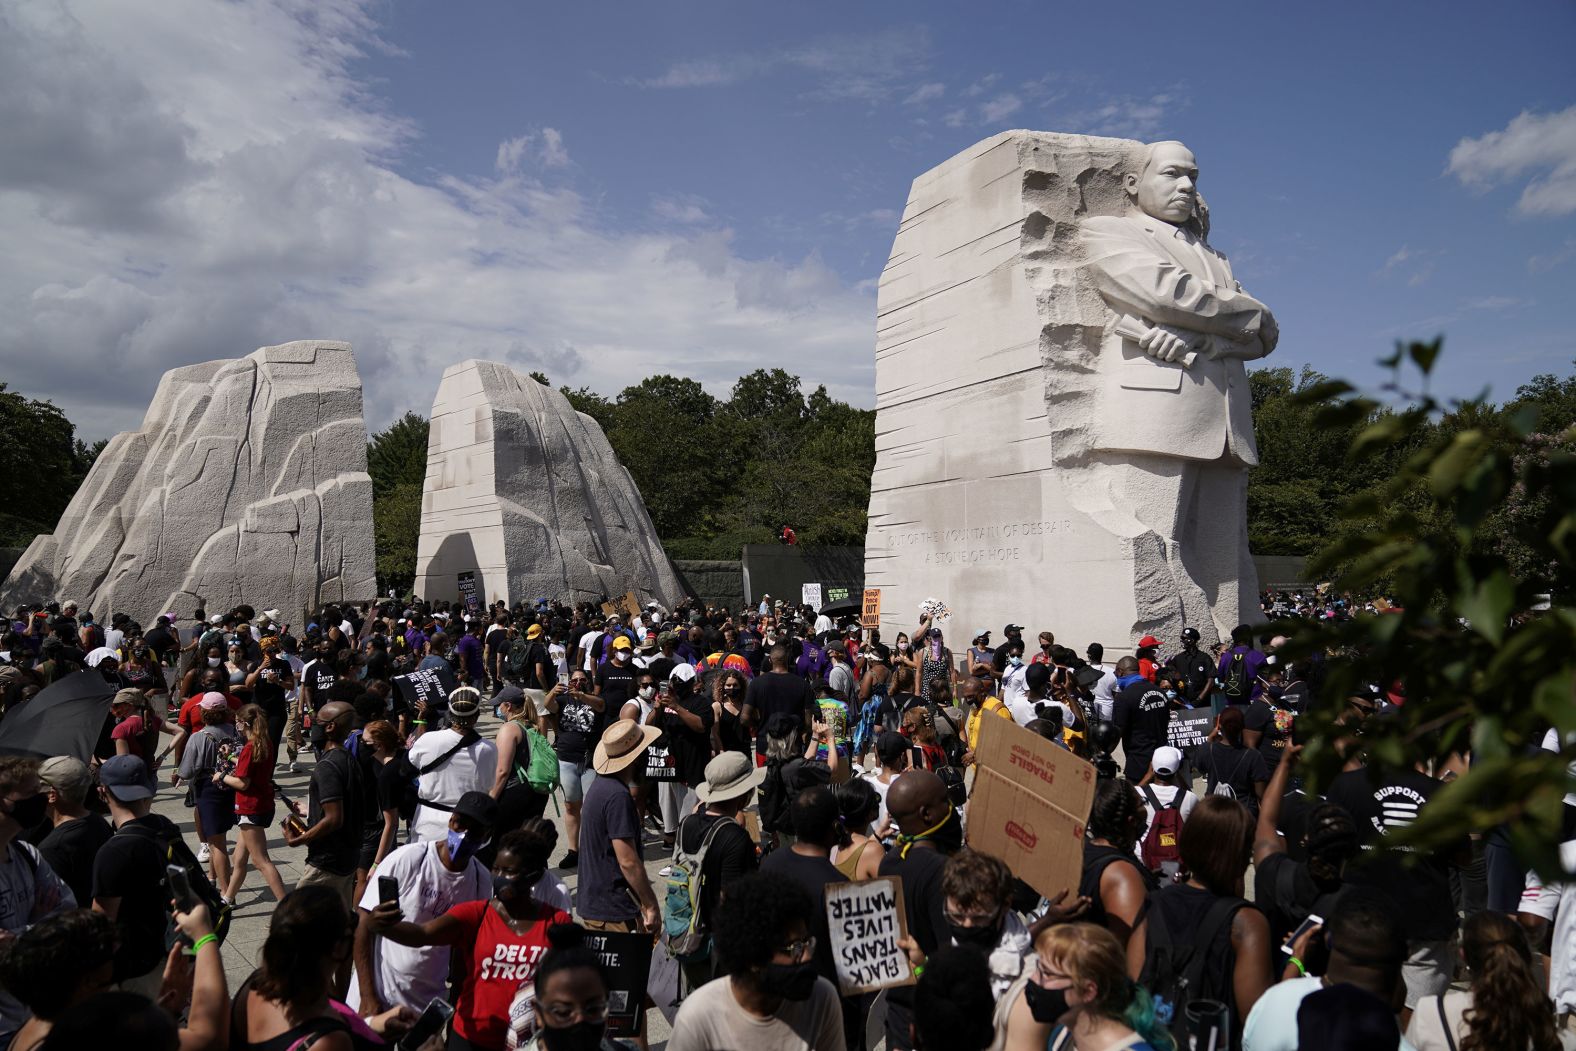 Demonstrators gather next to the Martin Luther King Jr. Memorial after marching from the Lincoln Memorial.